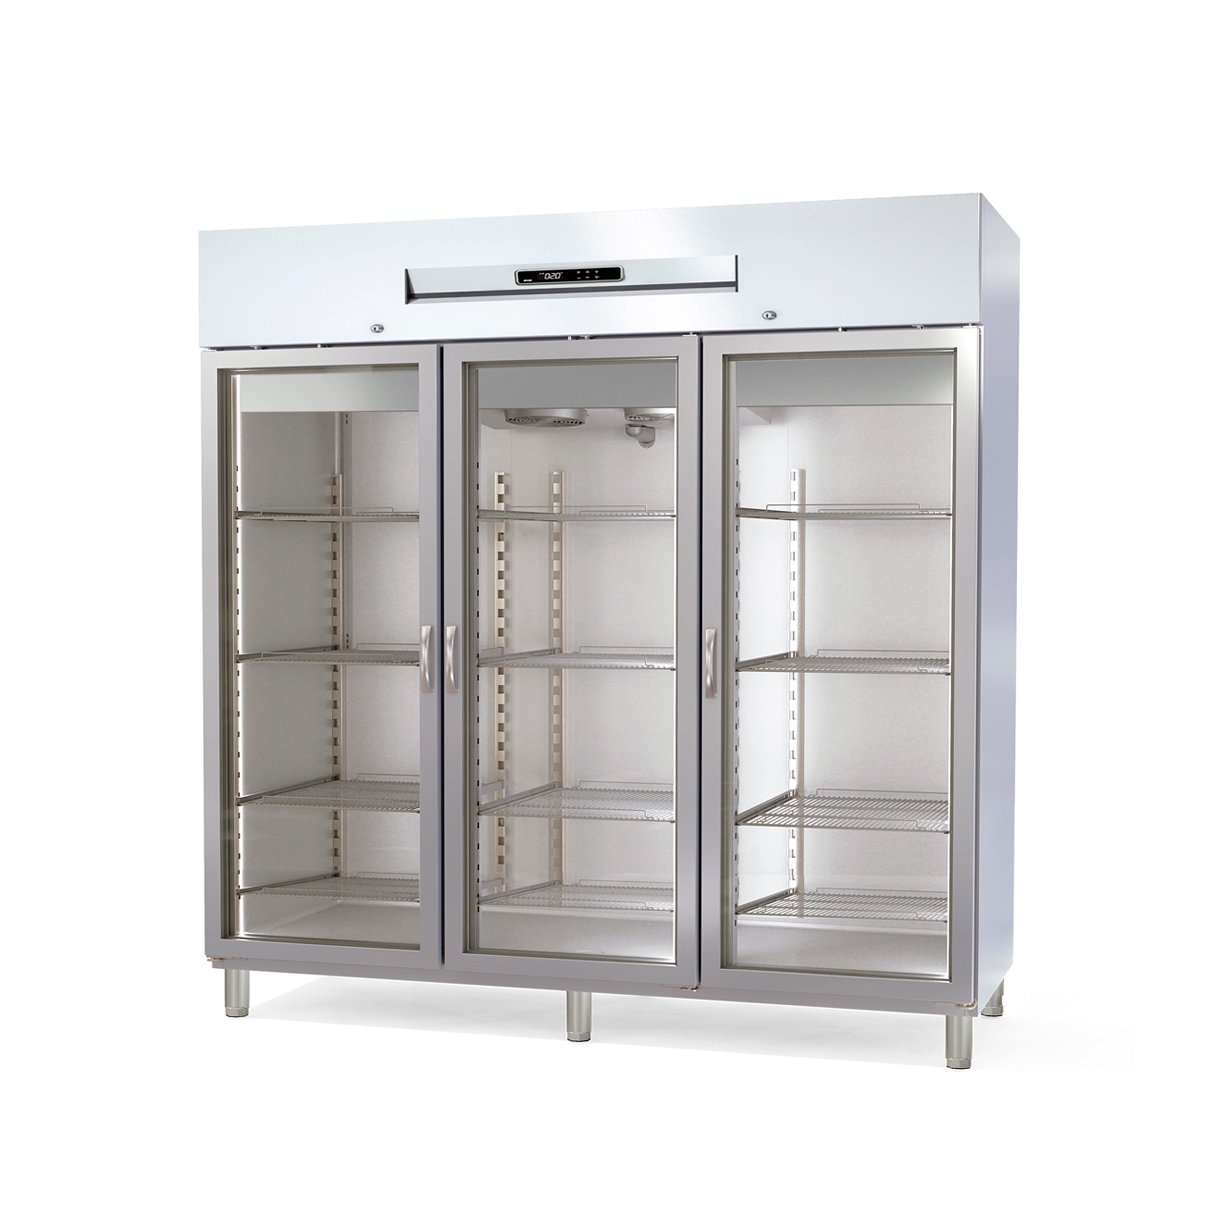 Gastronorm 2/1 Freezing Cabinet AGV-210-3-C